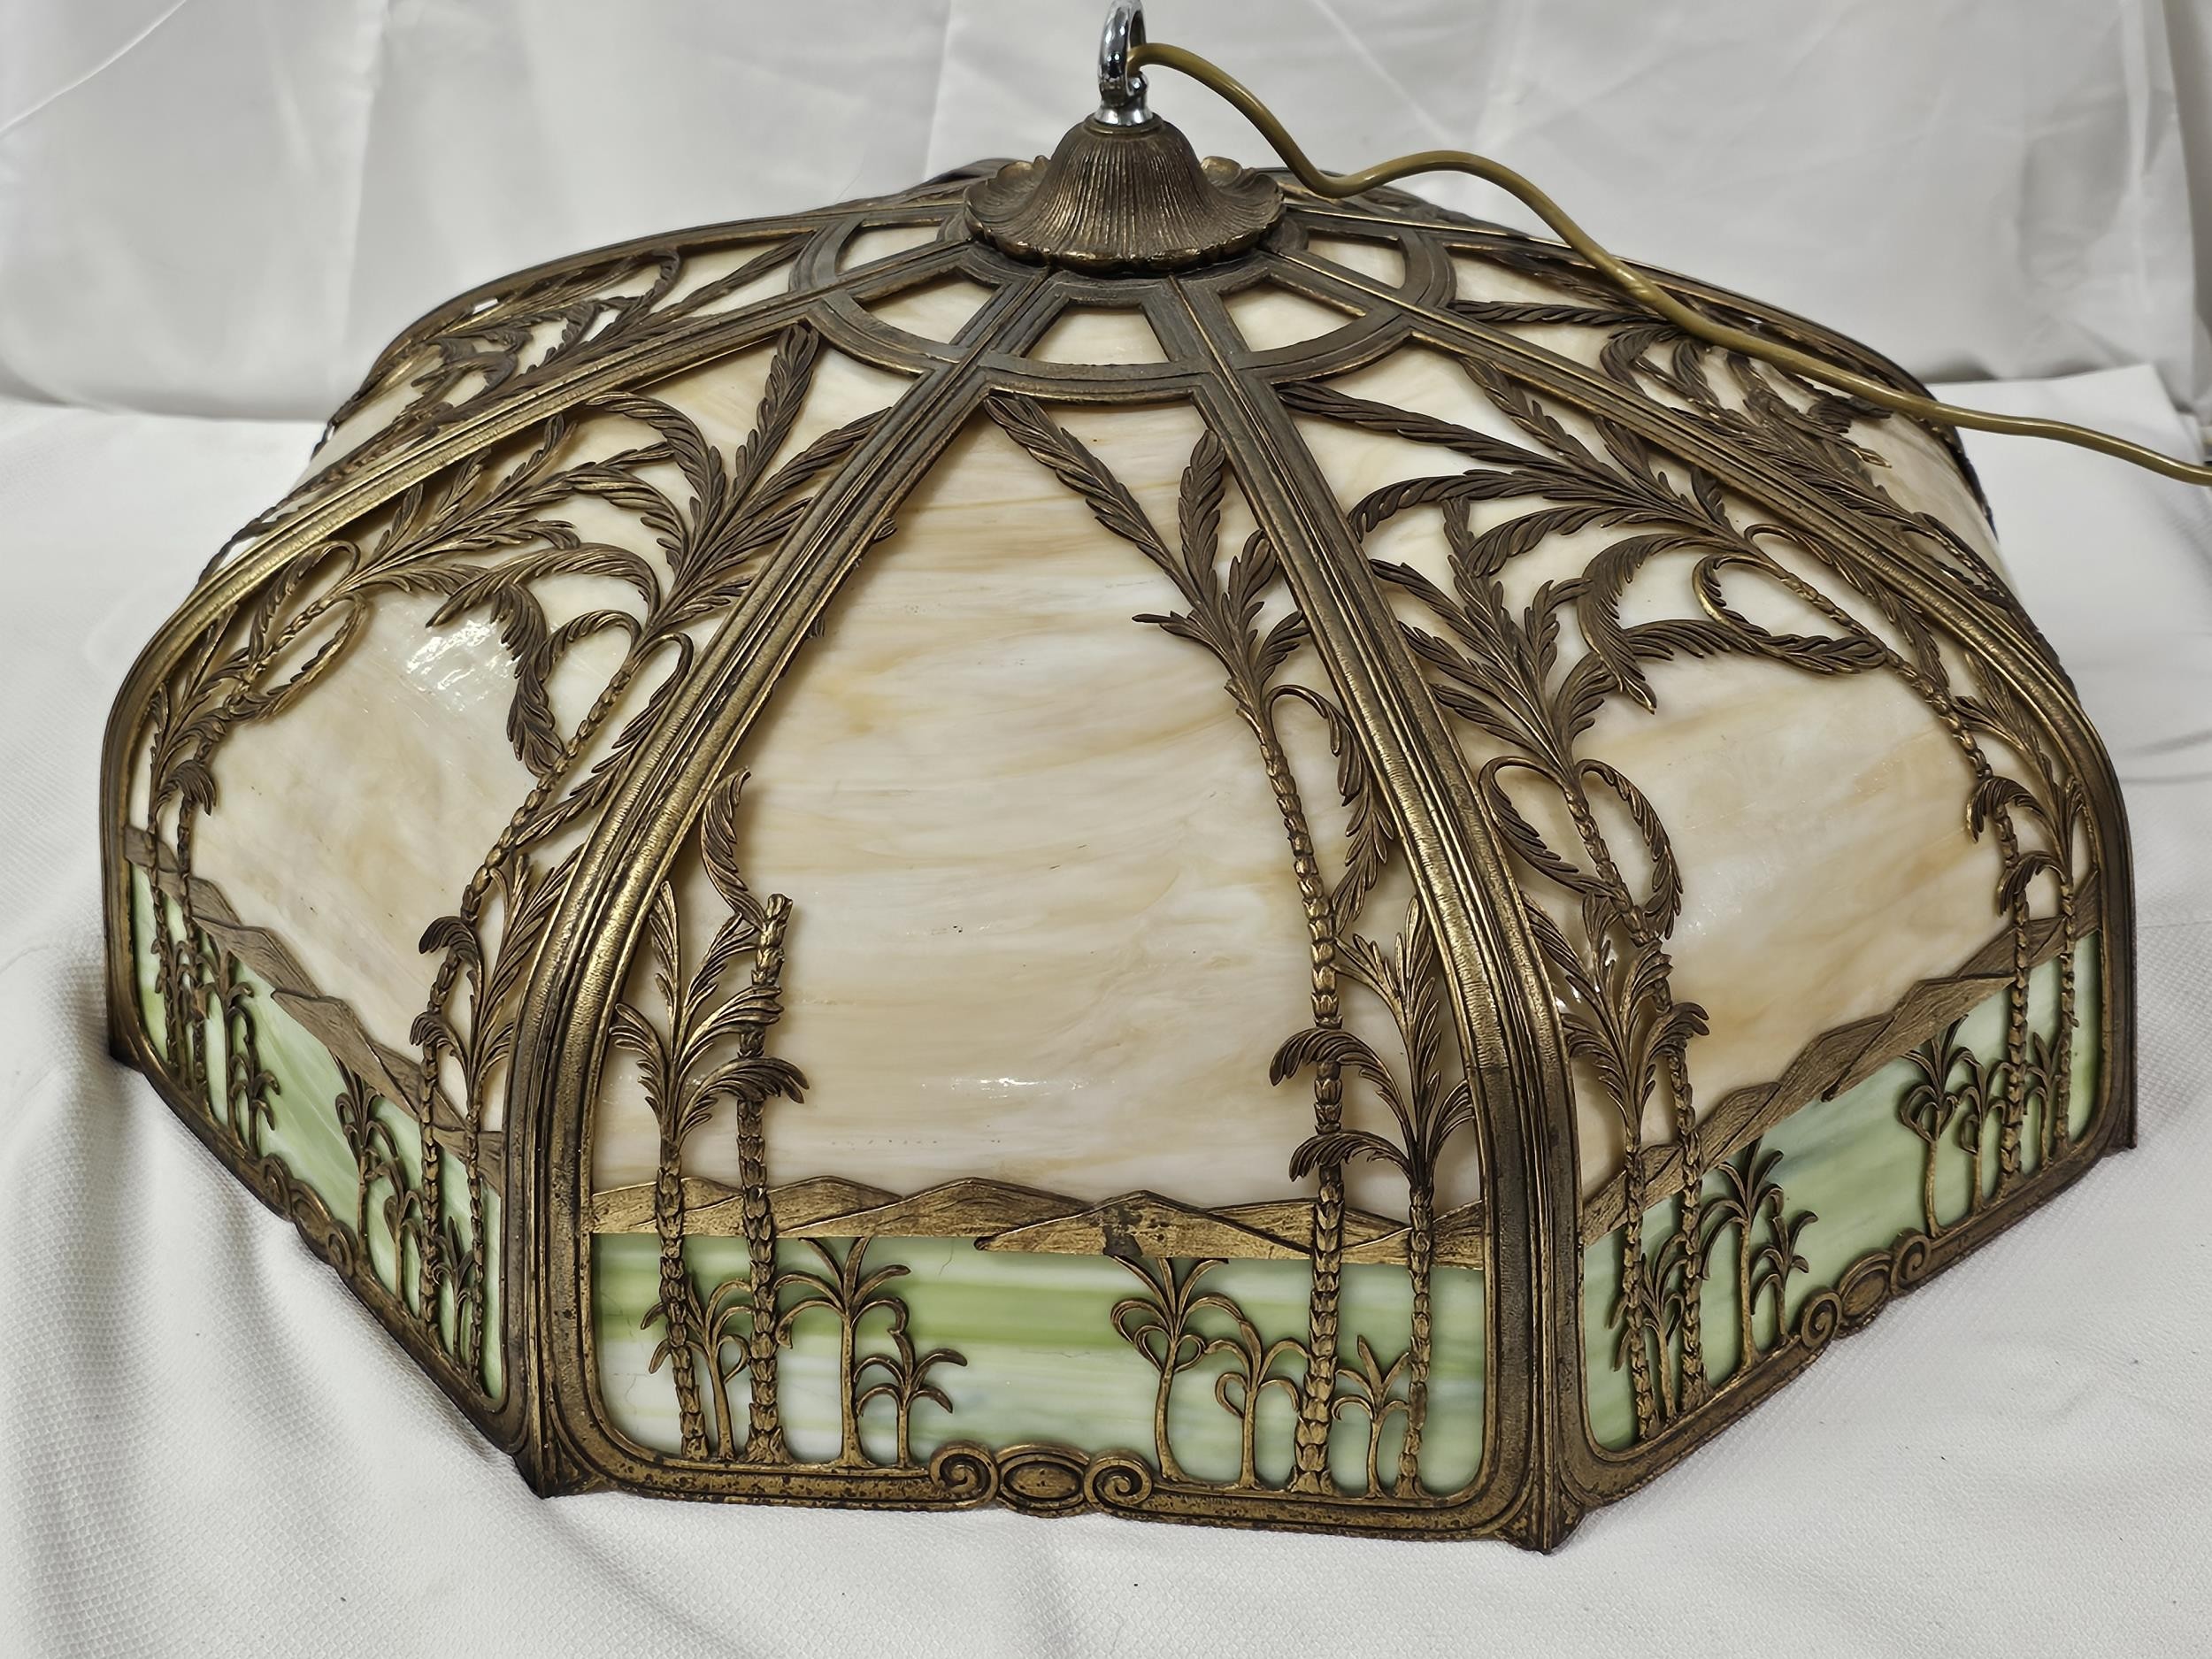 An Art Deco Miller style bronze overlay slag glass ceiling light with palm tree and mountain